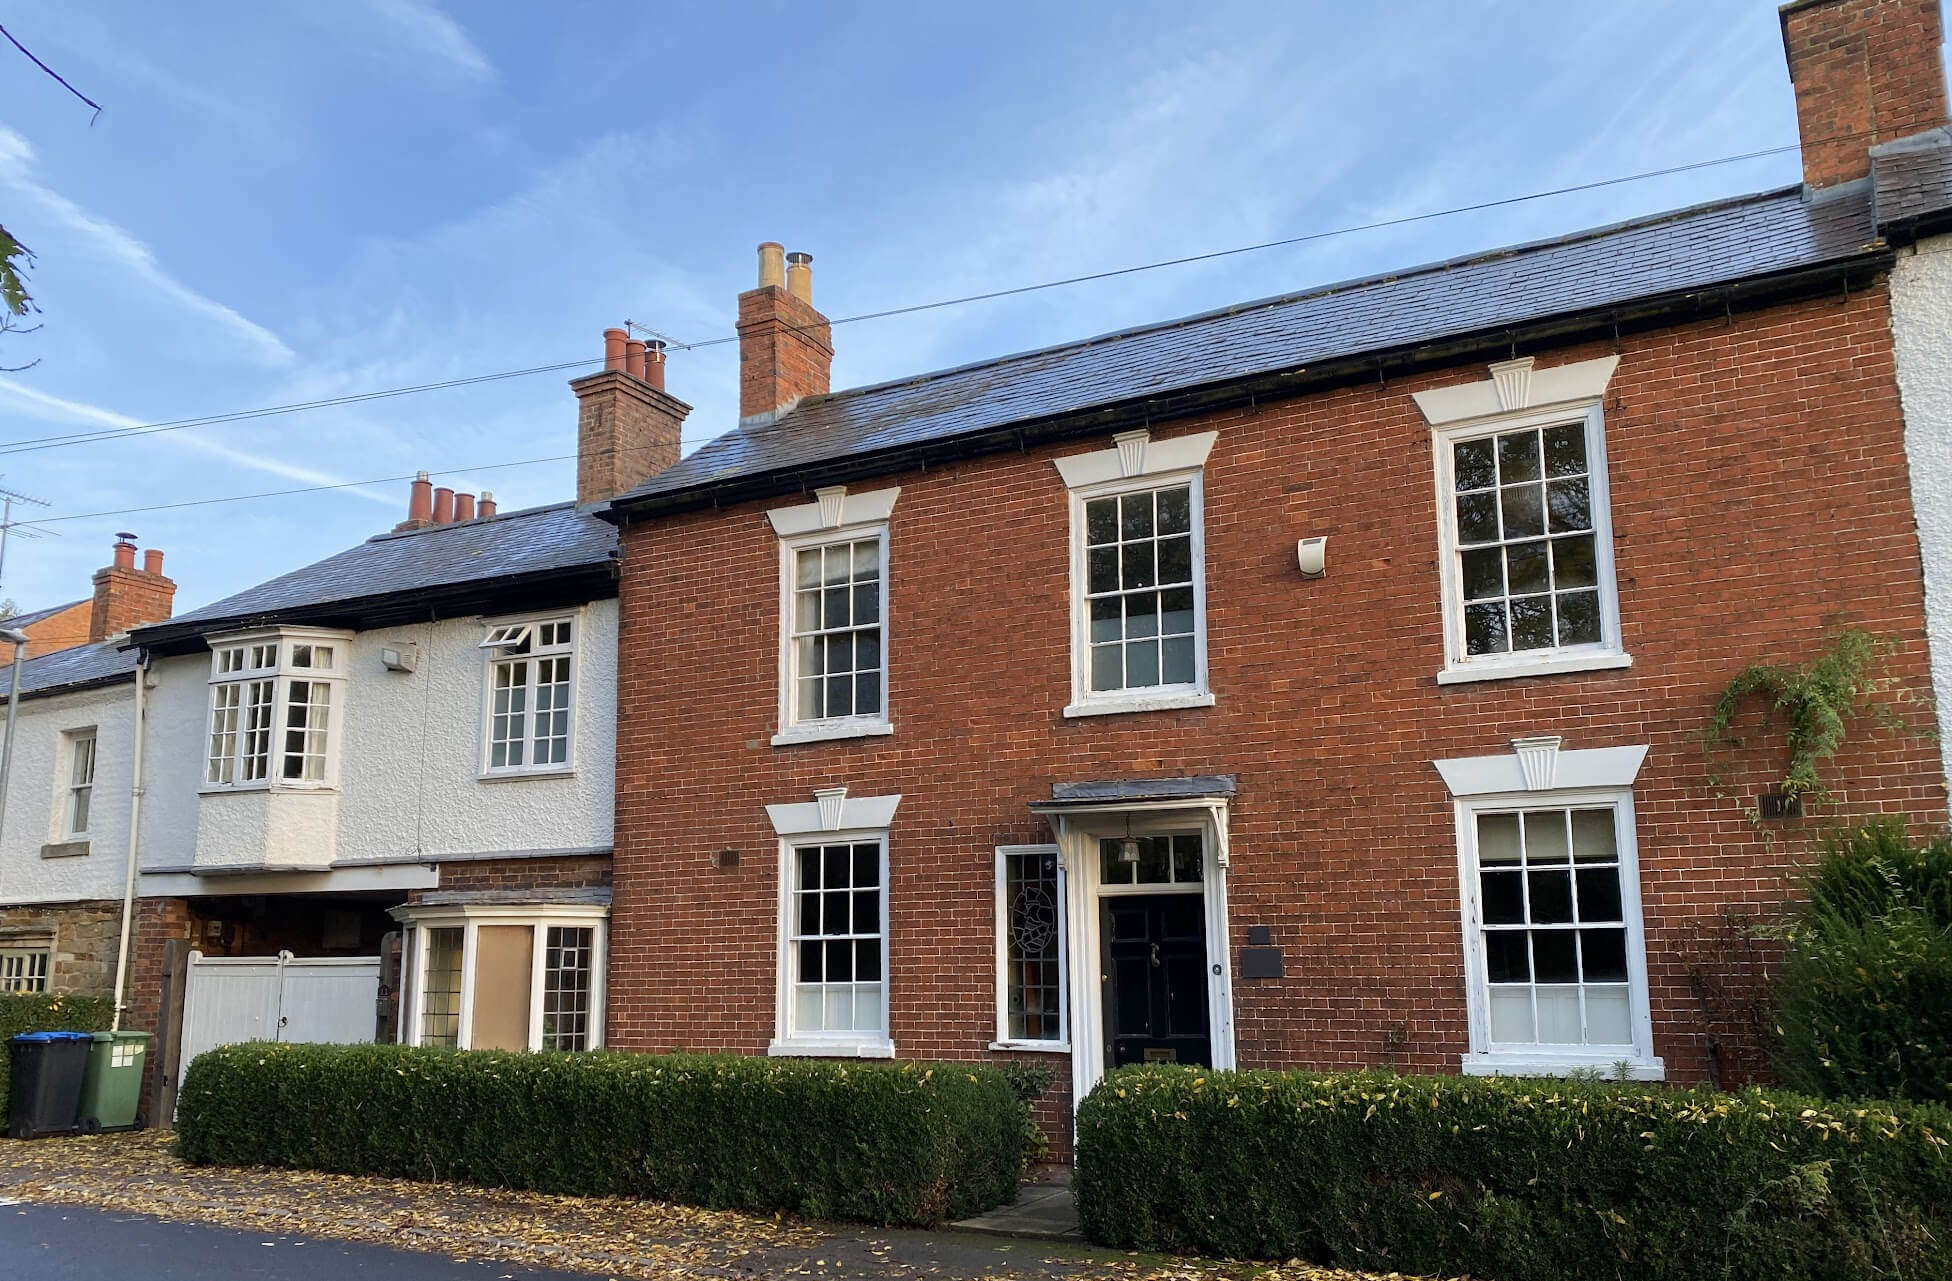 Double glazing retrofit in Leicestershire